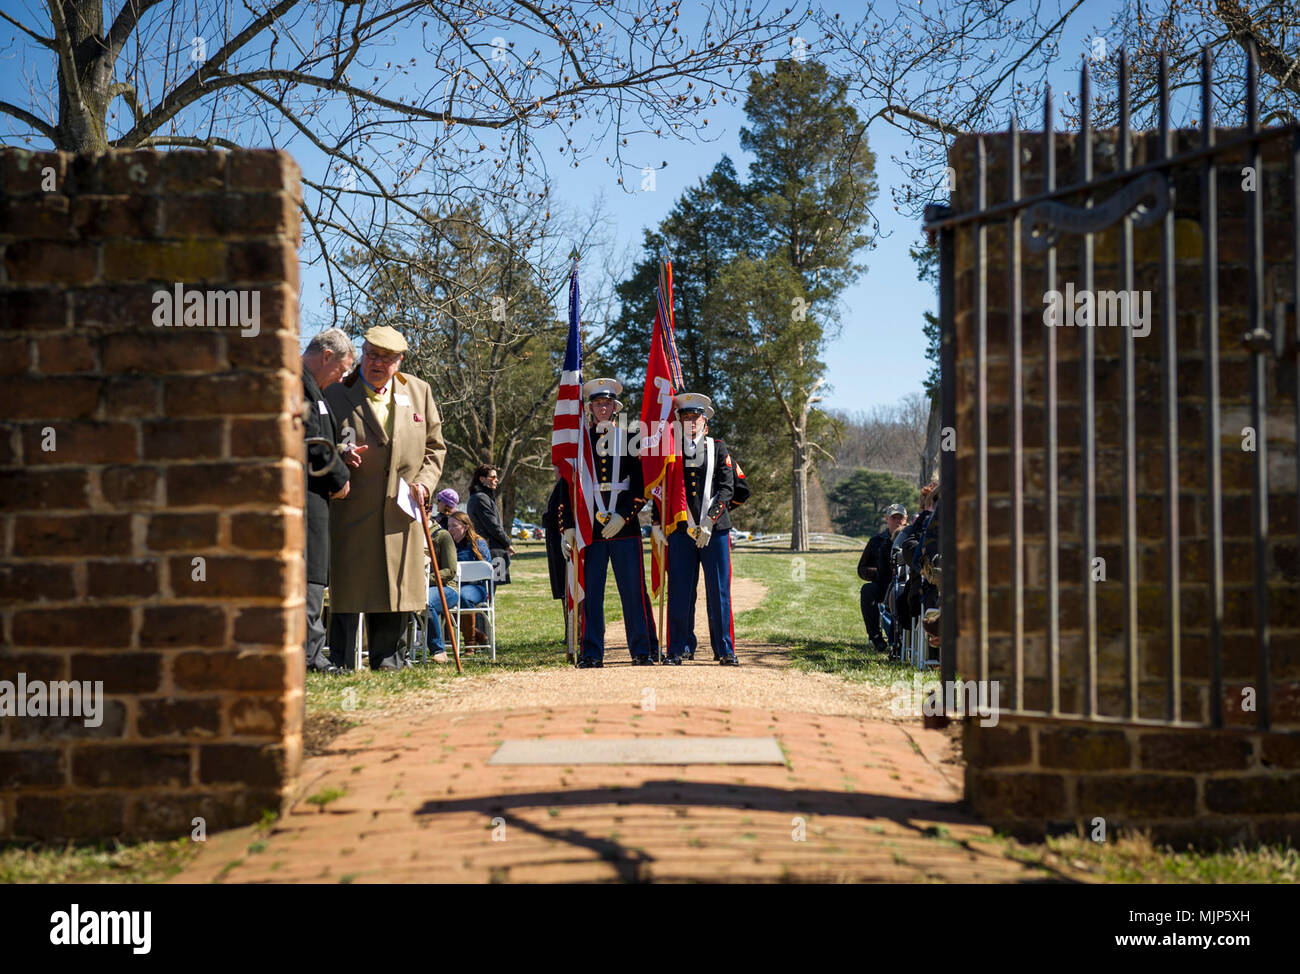 U.S. Marines with Marine Corps Base Quantico Color Guard prepare to enter the cemetery for the Presidential wreath laying ceremony held in honor of the 4th President of the United States, James Madison, also known as the Father of the Constitution, at his home at Montpelier, Orange, Va., March 16, 2018. This event was held in commemoration of the 267th anniversary of the birth of Madison, born in 1751, and has also been decreed as James Madison Appreciation Day for the Commonwealth of Virginia. Armed Forces and civilians displaying courage bravery dedication commitment and sacrifice Stock Photo